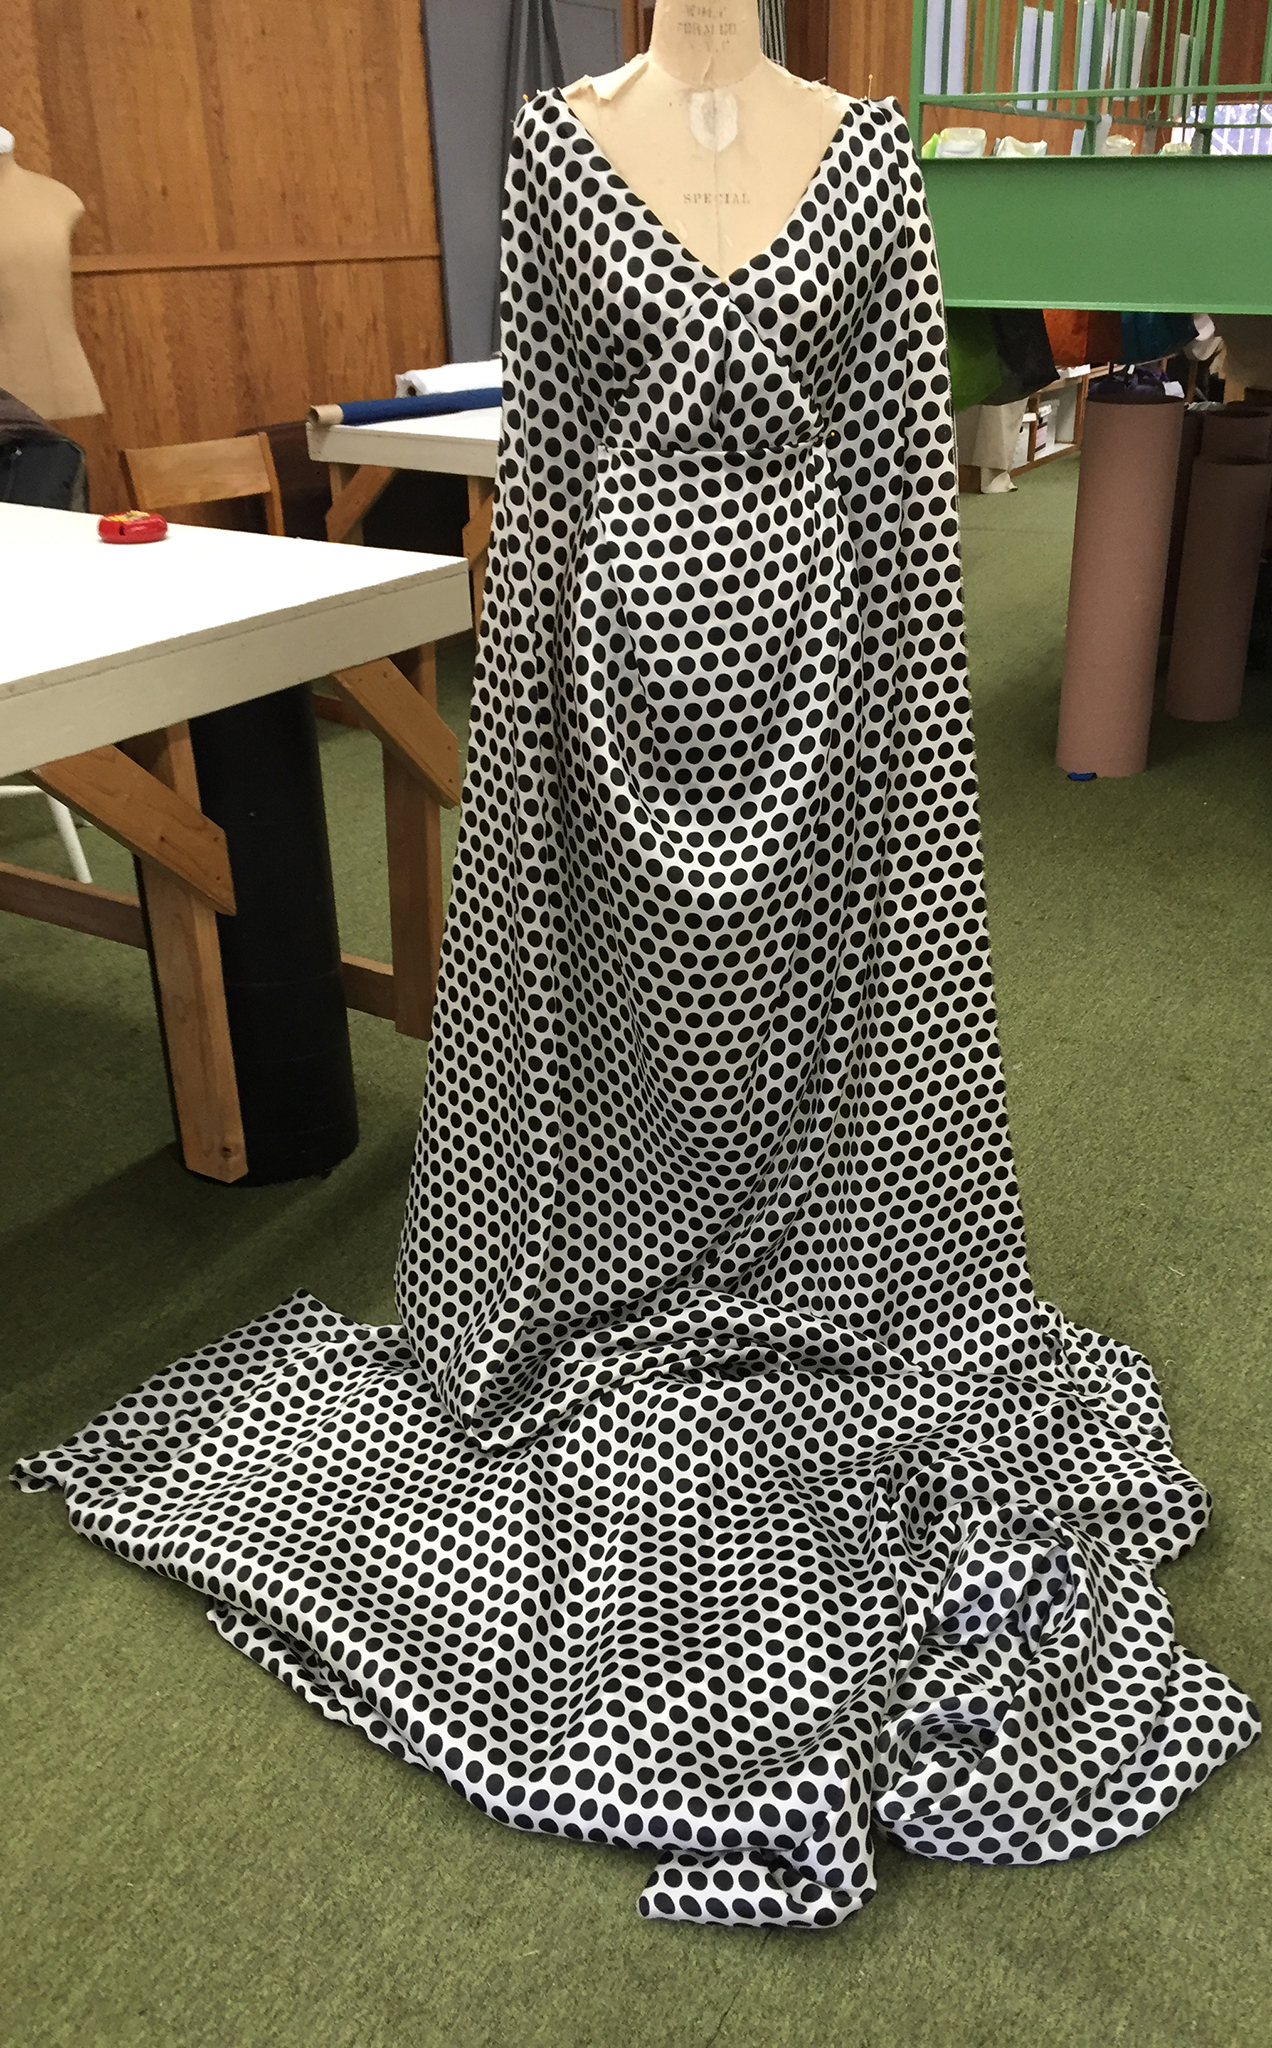 10 yards of continuous white silk organza fabric with black polka dots draped over a dress form.